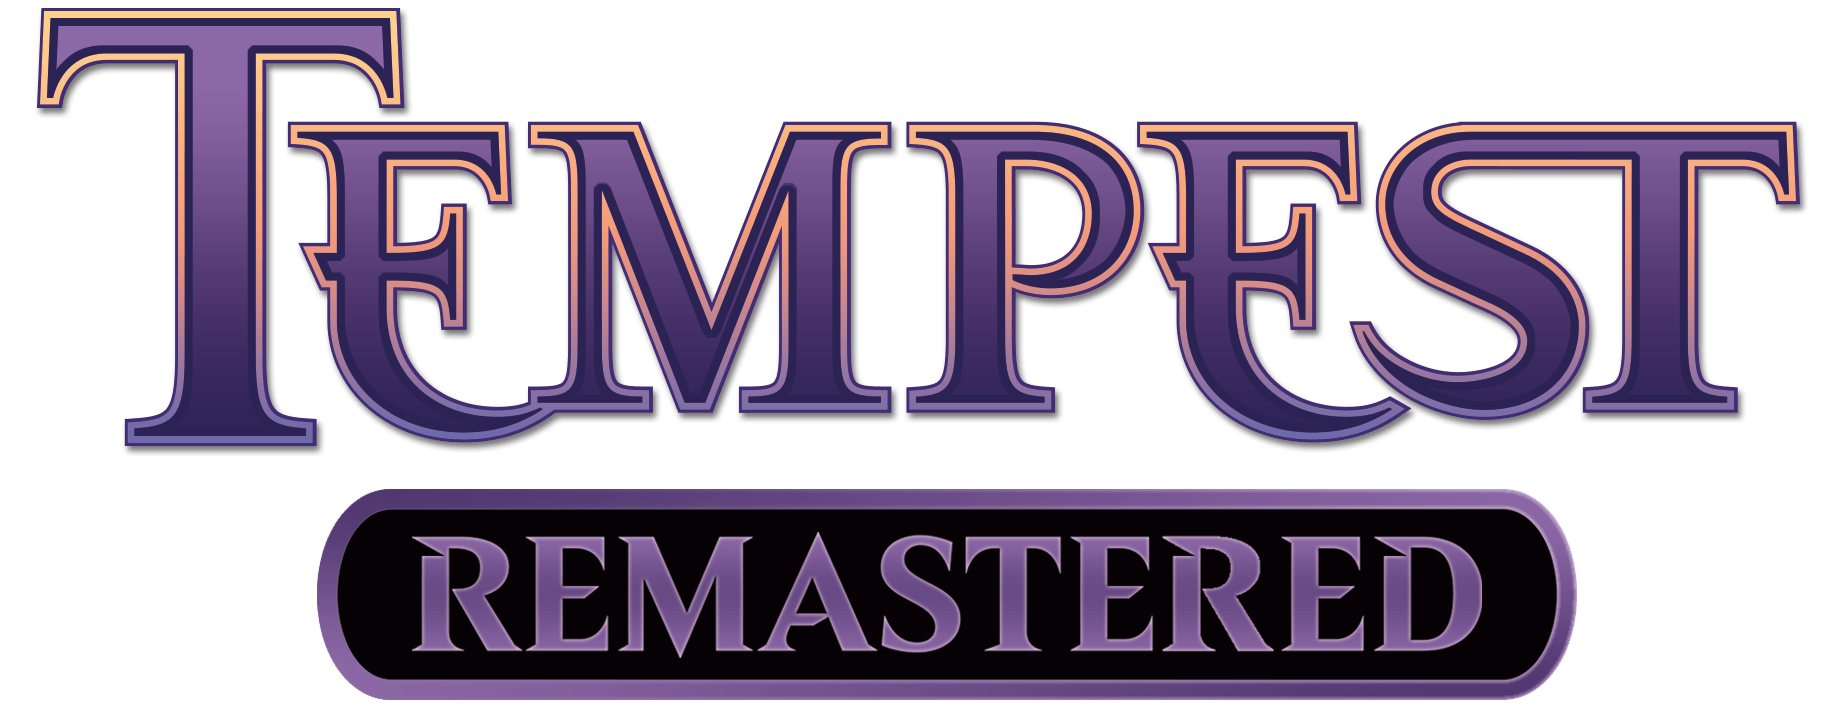 Remastered Logo - Announcing: Tempest Remastered - The Rumor Mill - Magic Fundamentals ...